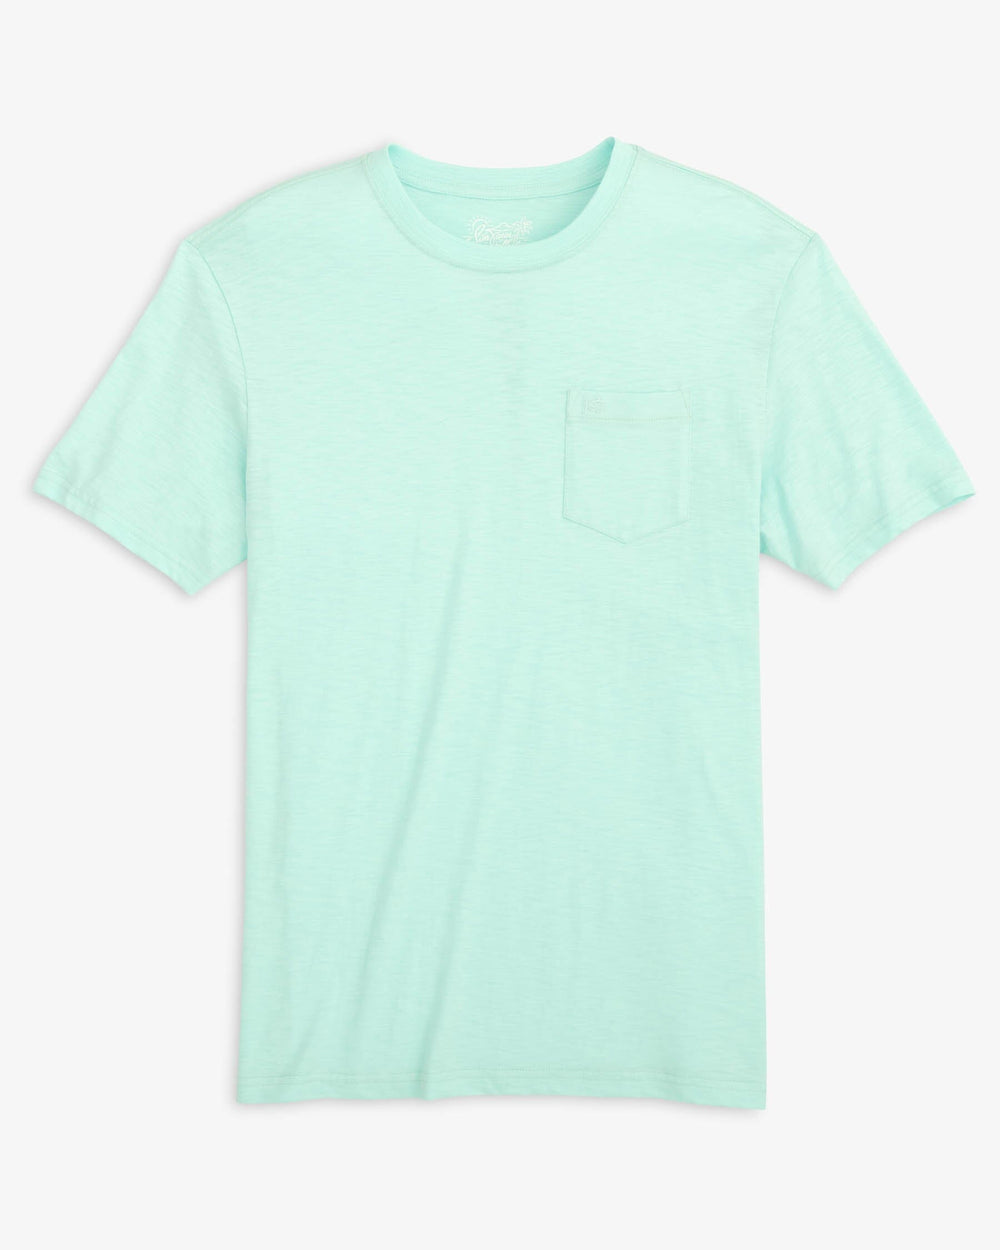 The front view of the Southern Tide Sun Farer Short Sleeve T-Shirt by Southern Tide - Baltic Teal